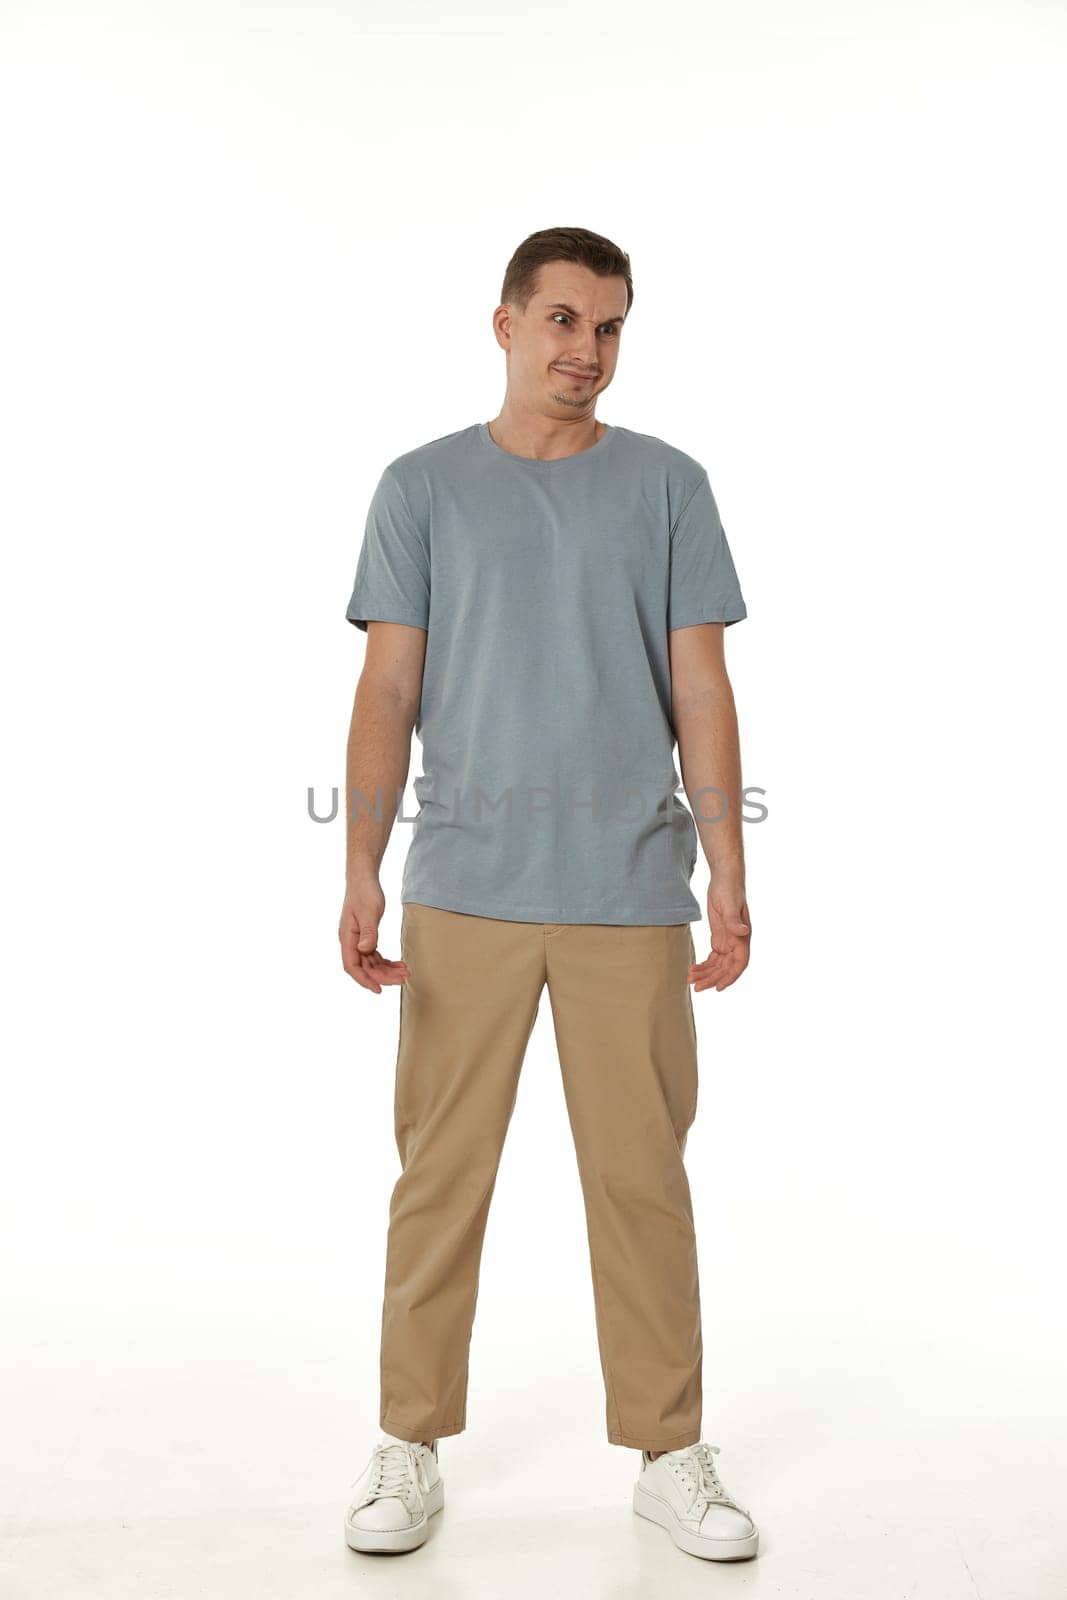 annoyed angry man standing on white studio background